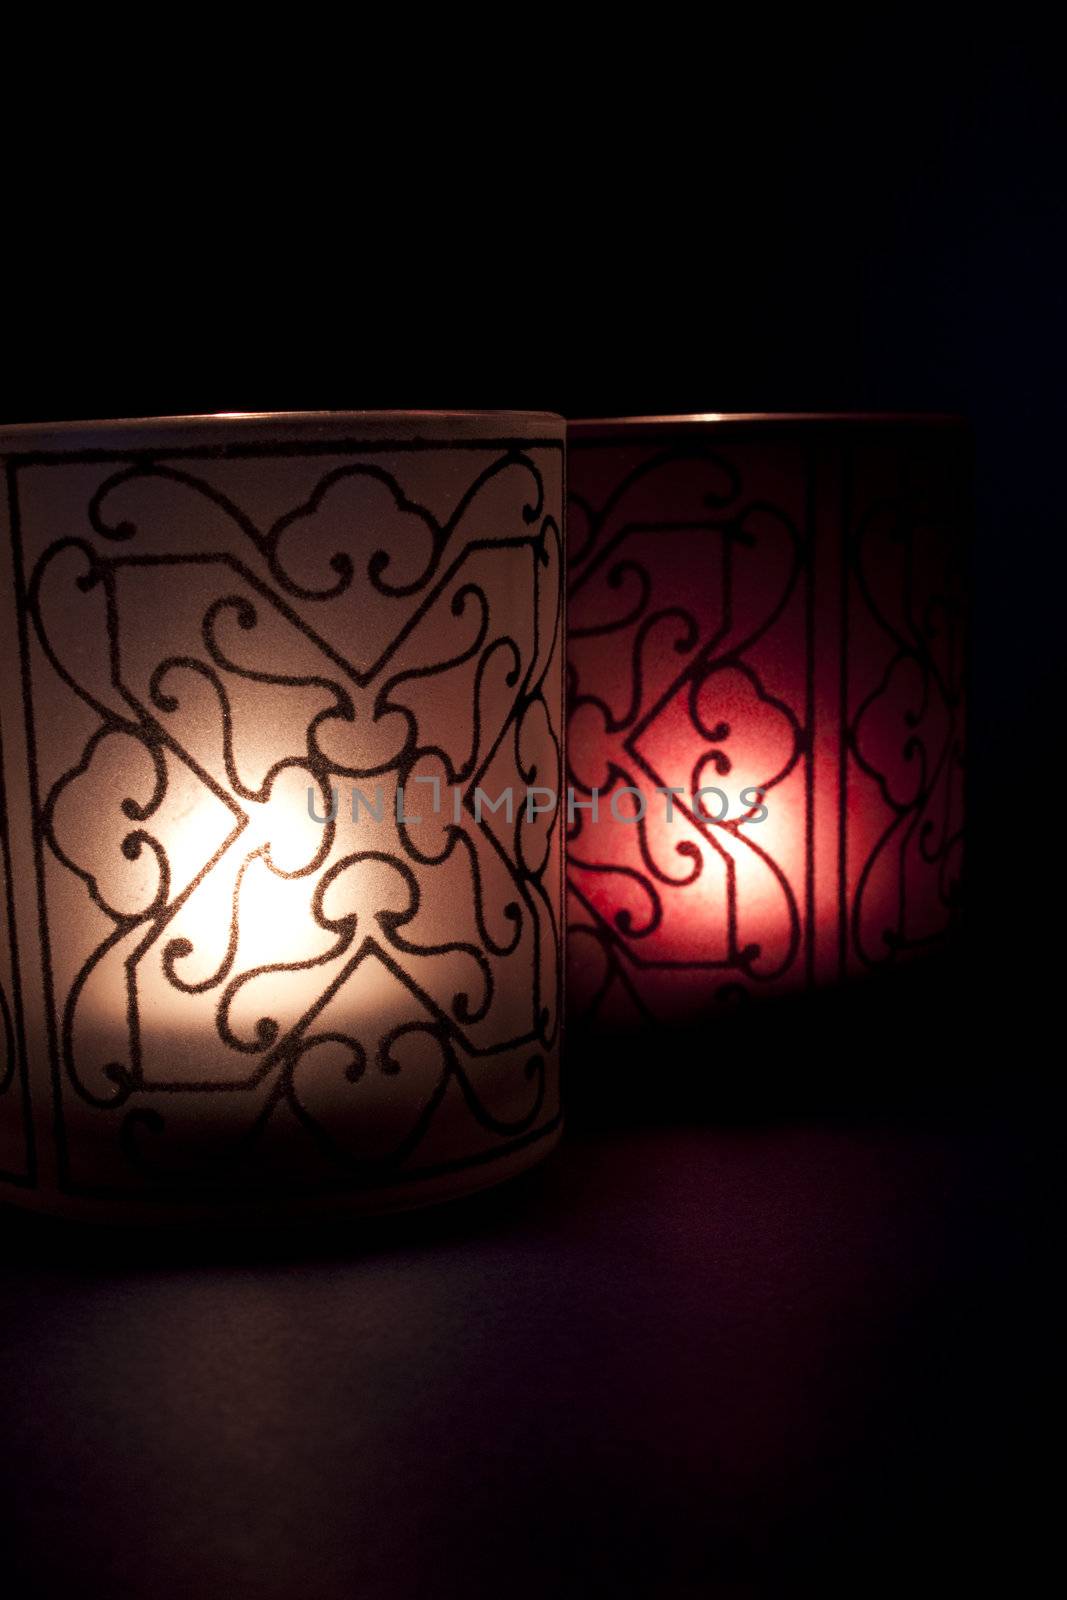 Stylized candles with light by Arsen